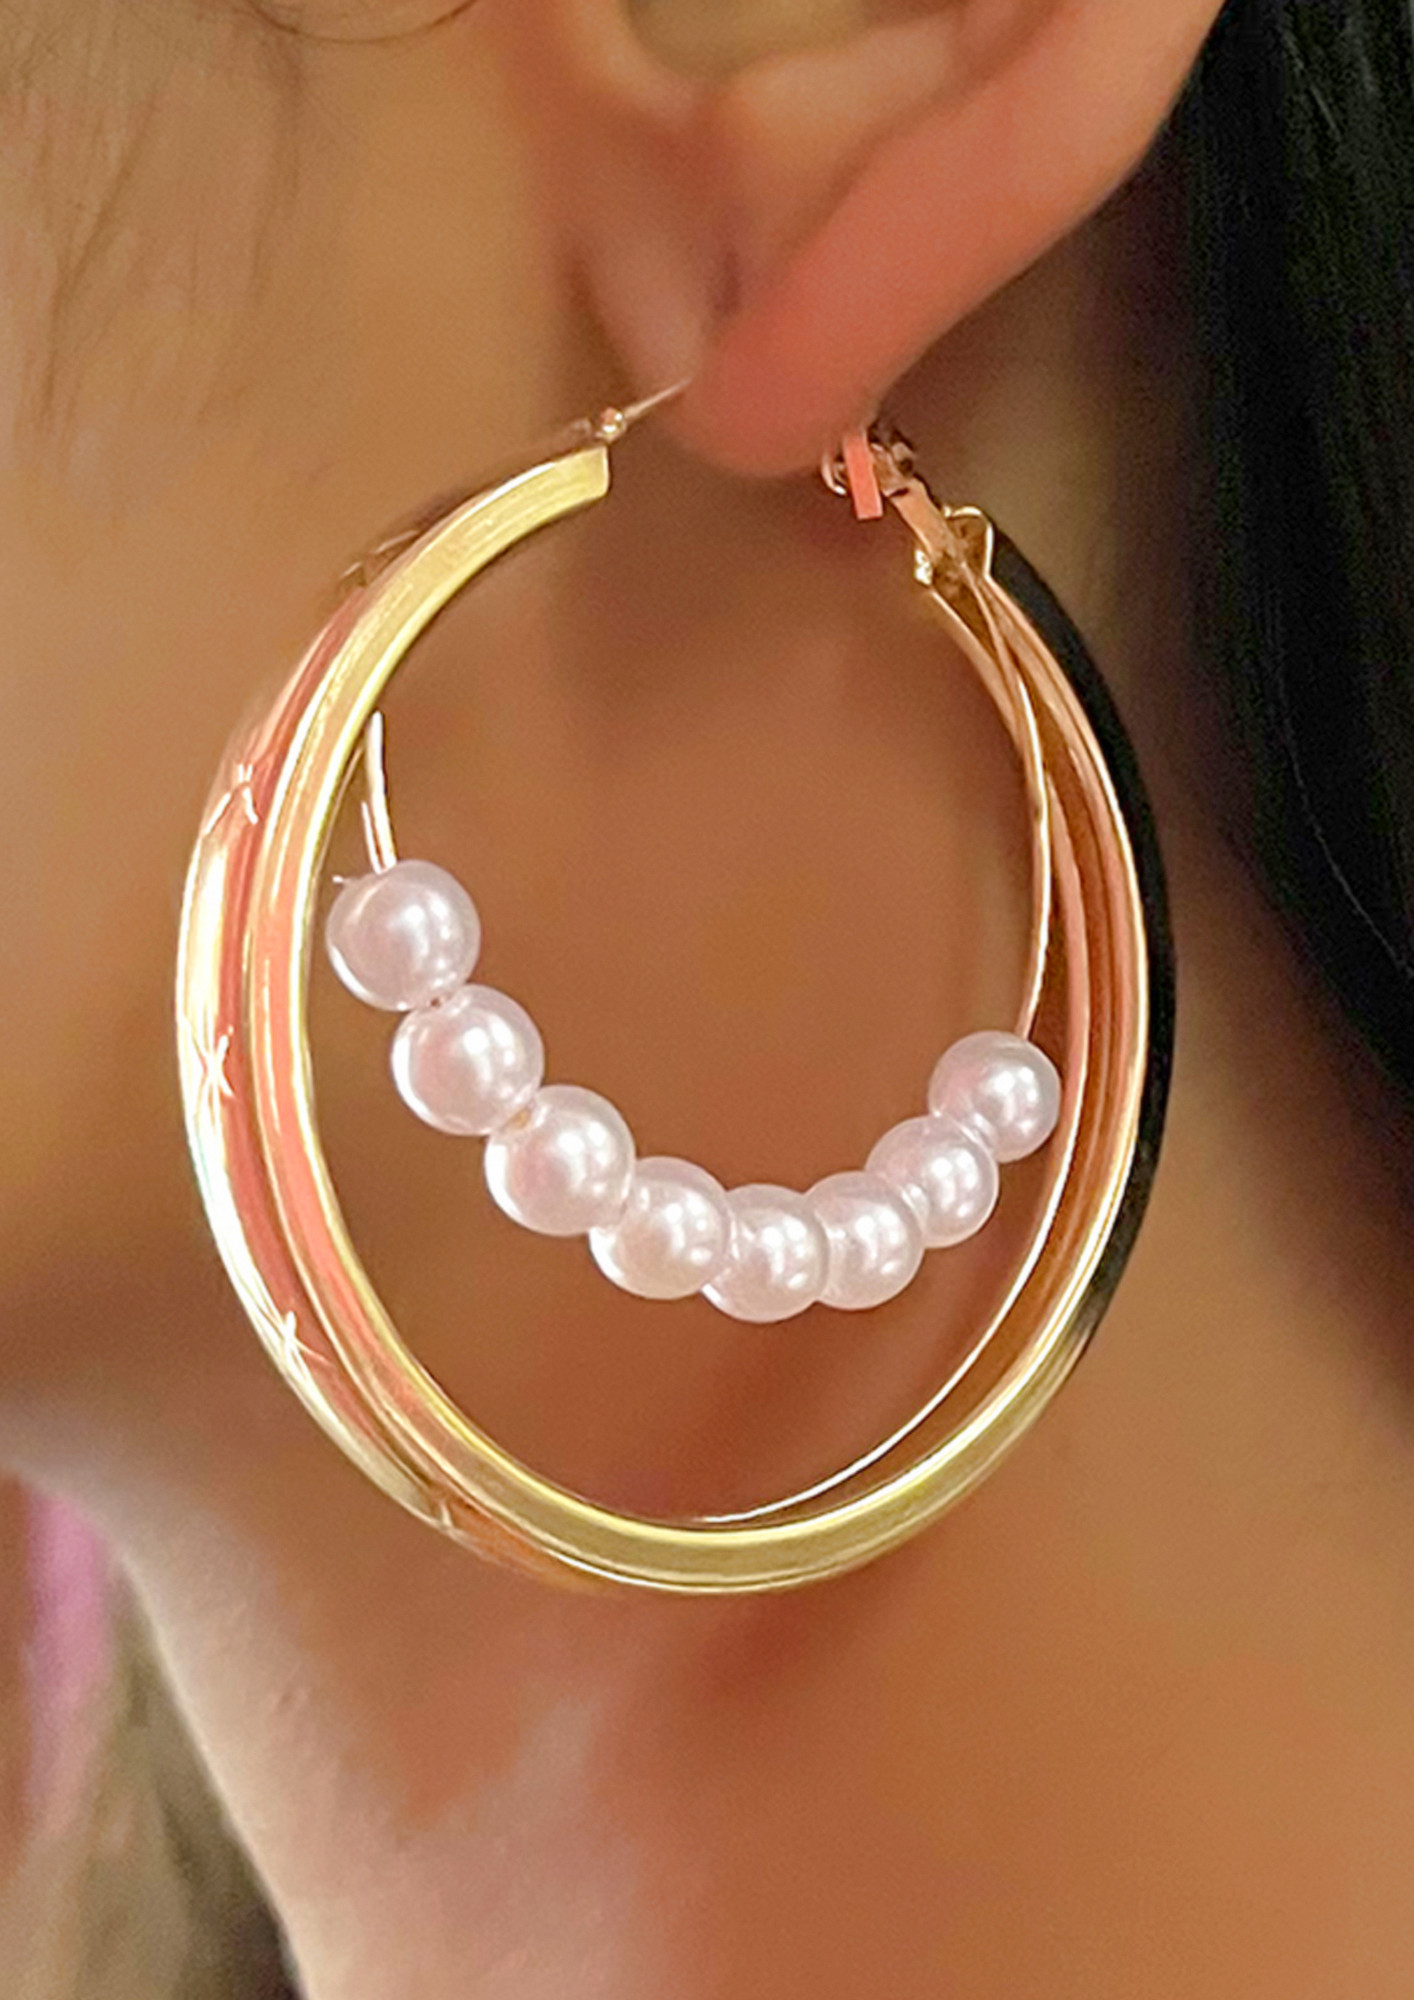 Oversized Pearl Studded Gold-Toned Circular Double Layered Hoop Earrings